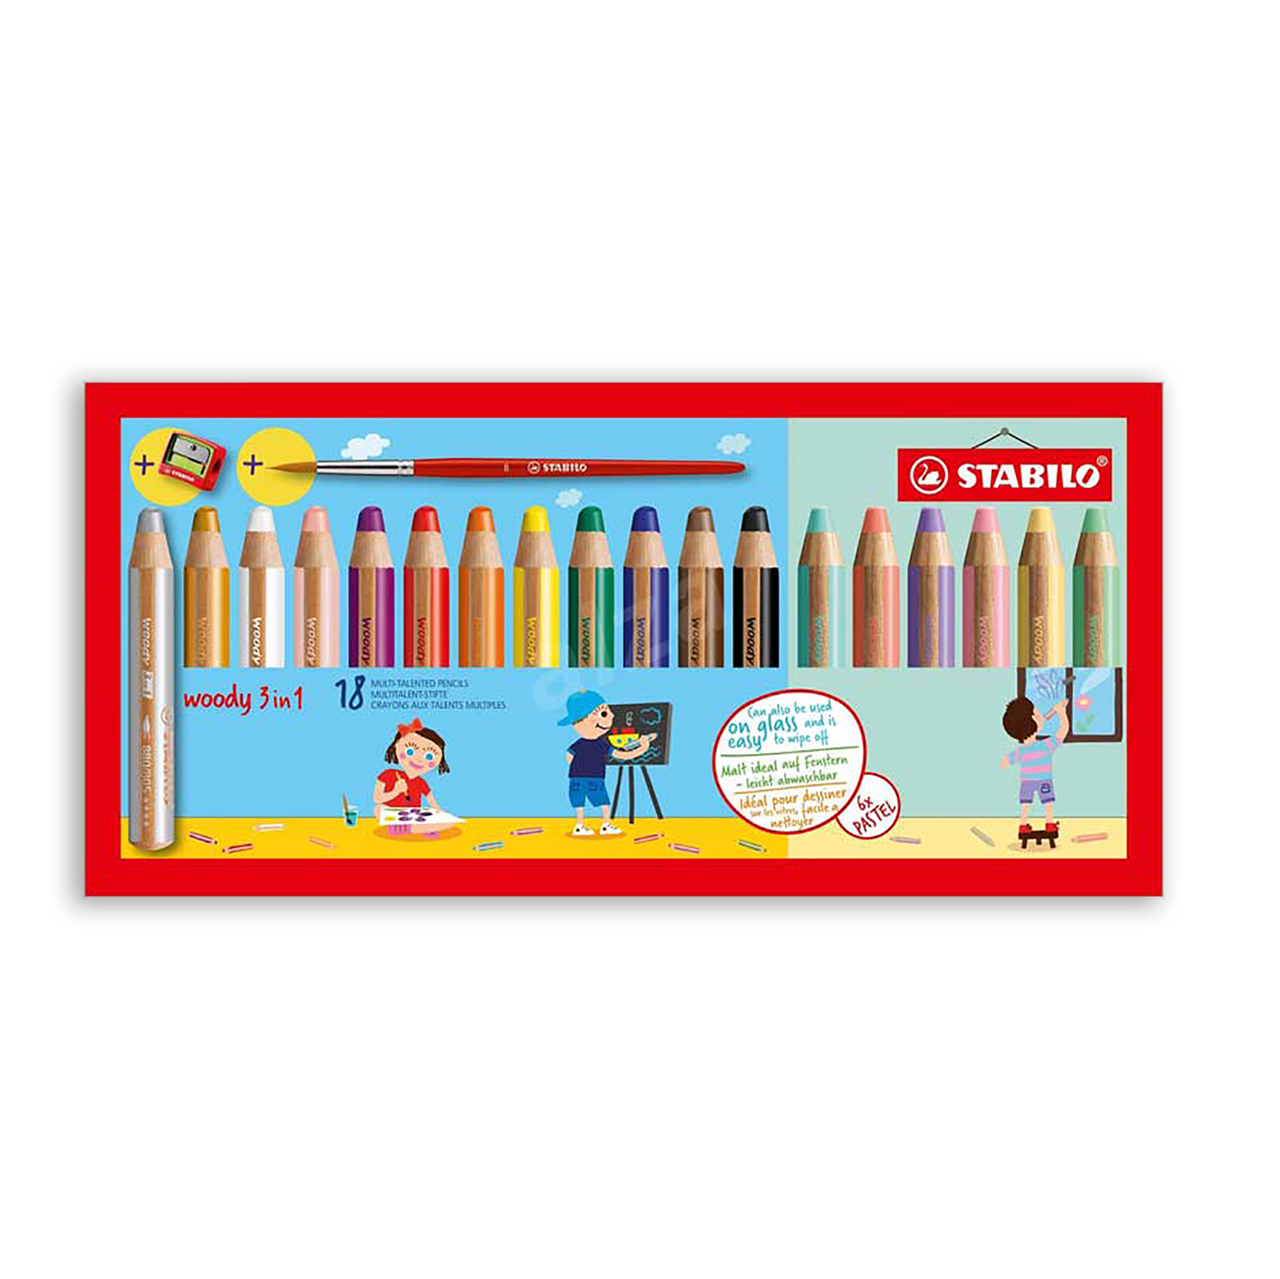 STABILO Woody 3-in-1 Pencil, Set of 18 with Sharpener